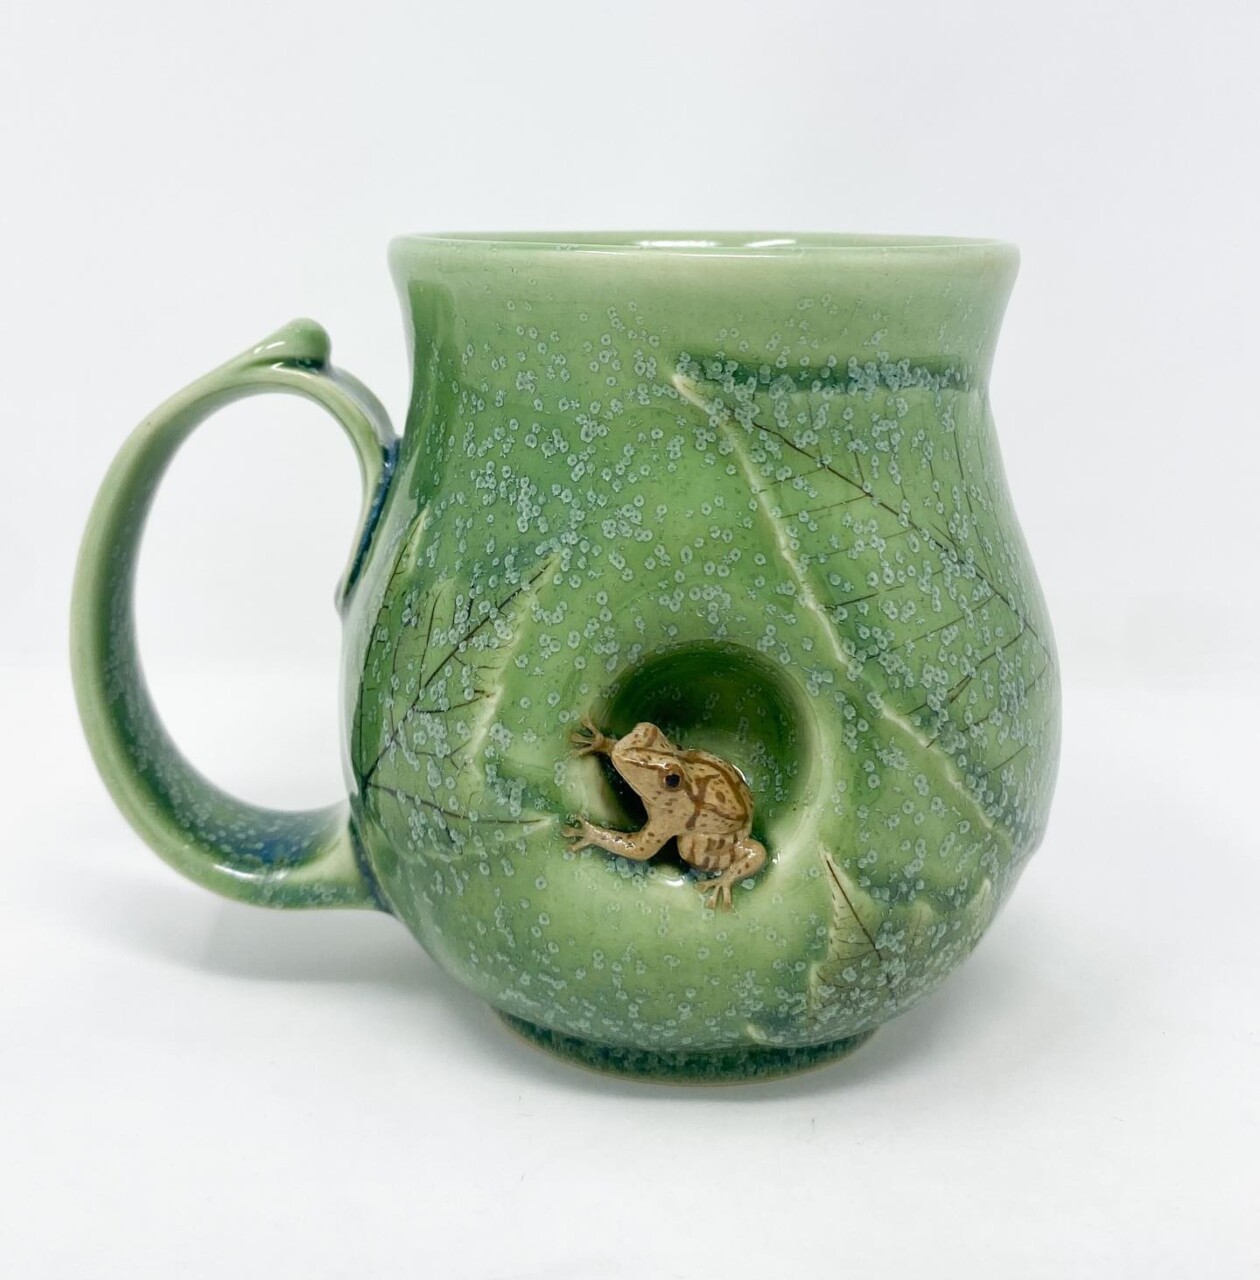 Ceramic Vases Decorated With Miniature Animal Sculptures By Brooke Knippa (12)